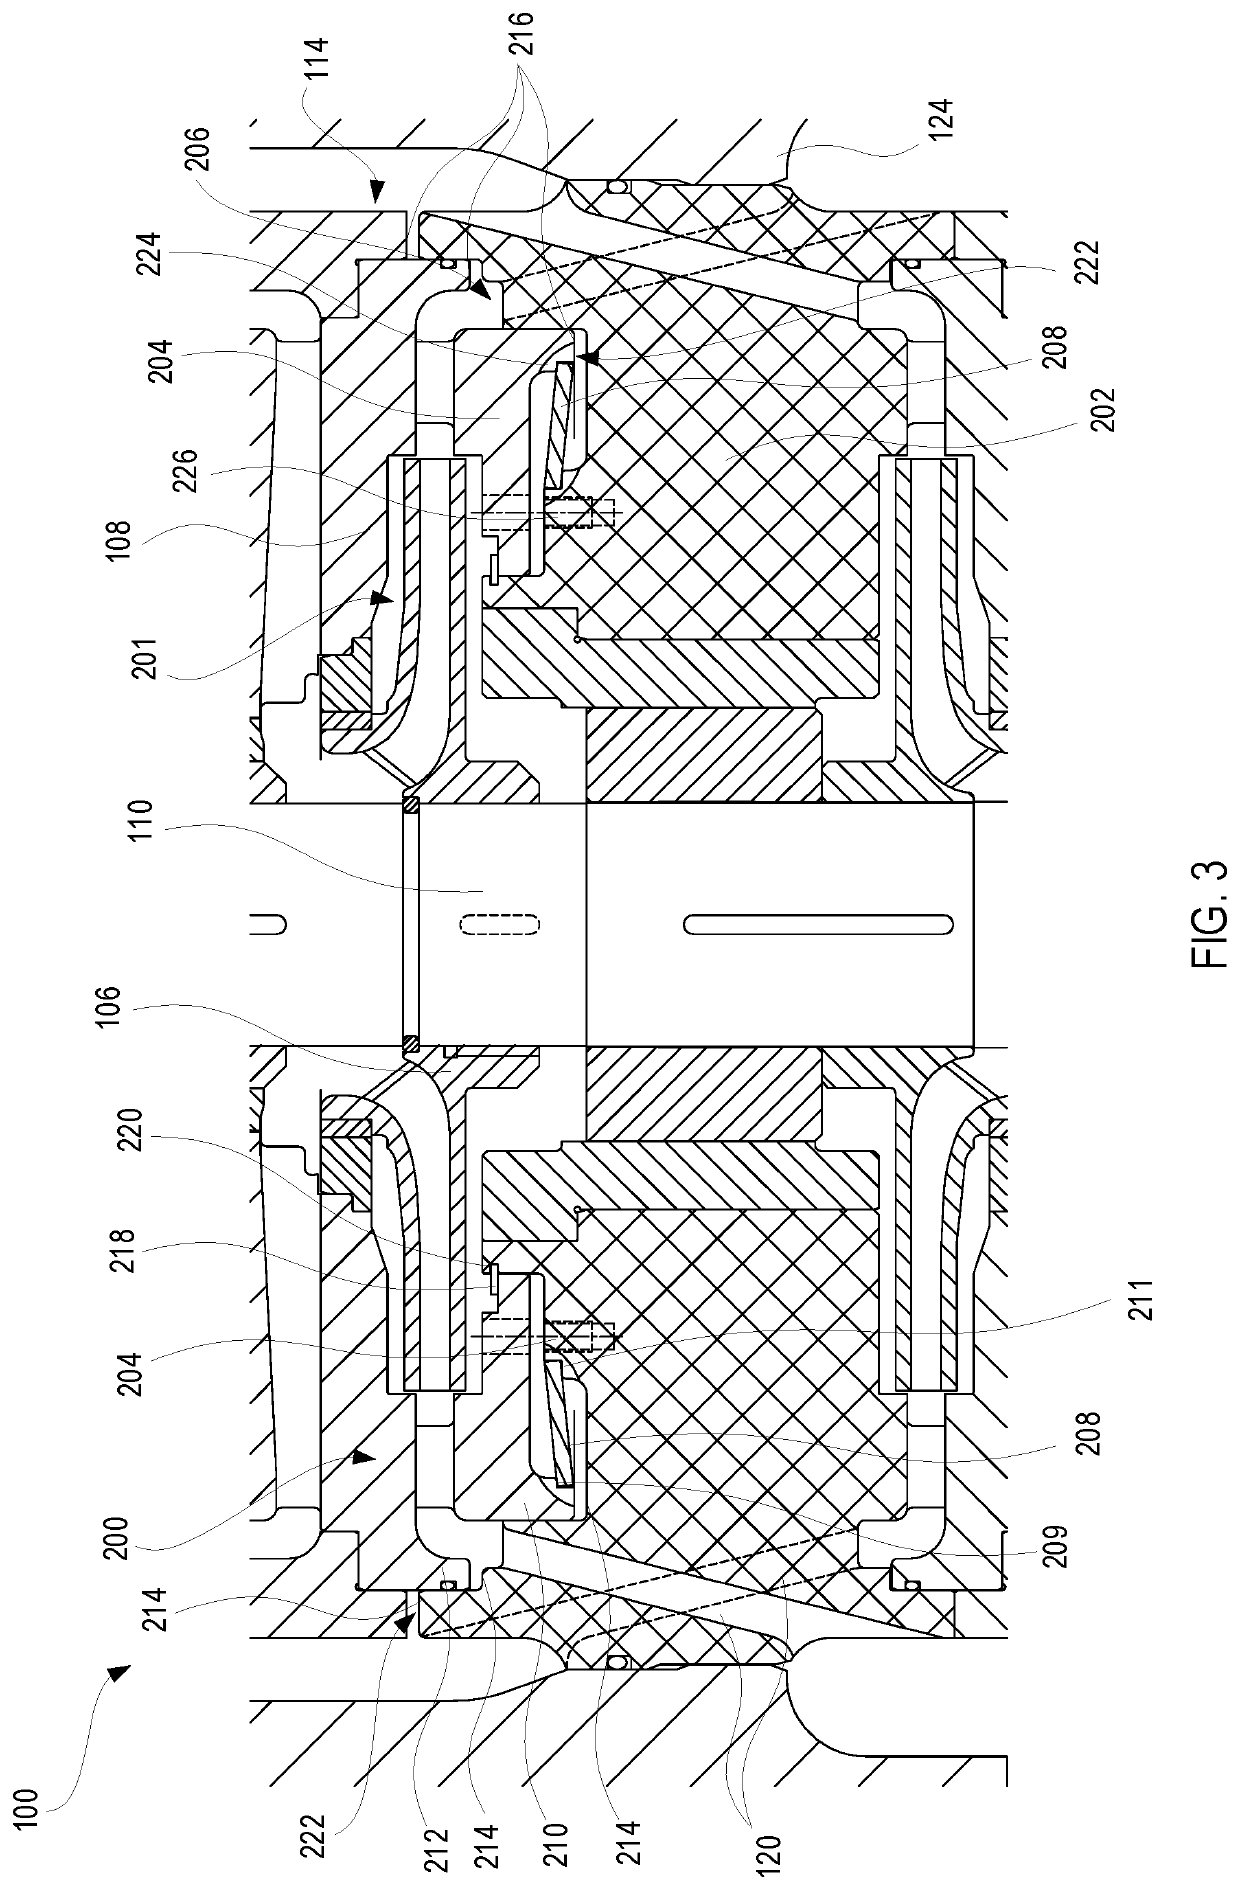 Compensation assemblies for fluid handling devices and related devices, systems, and methods